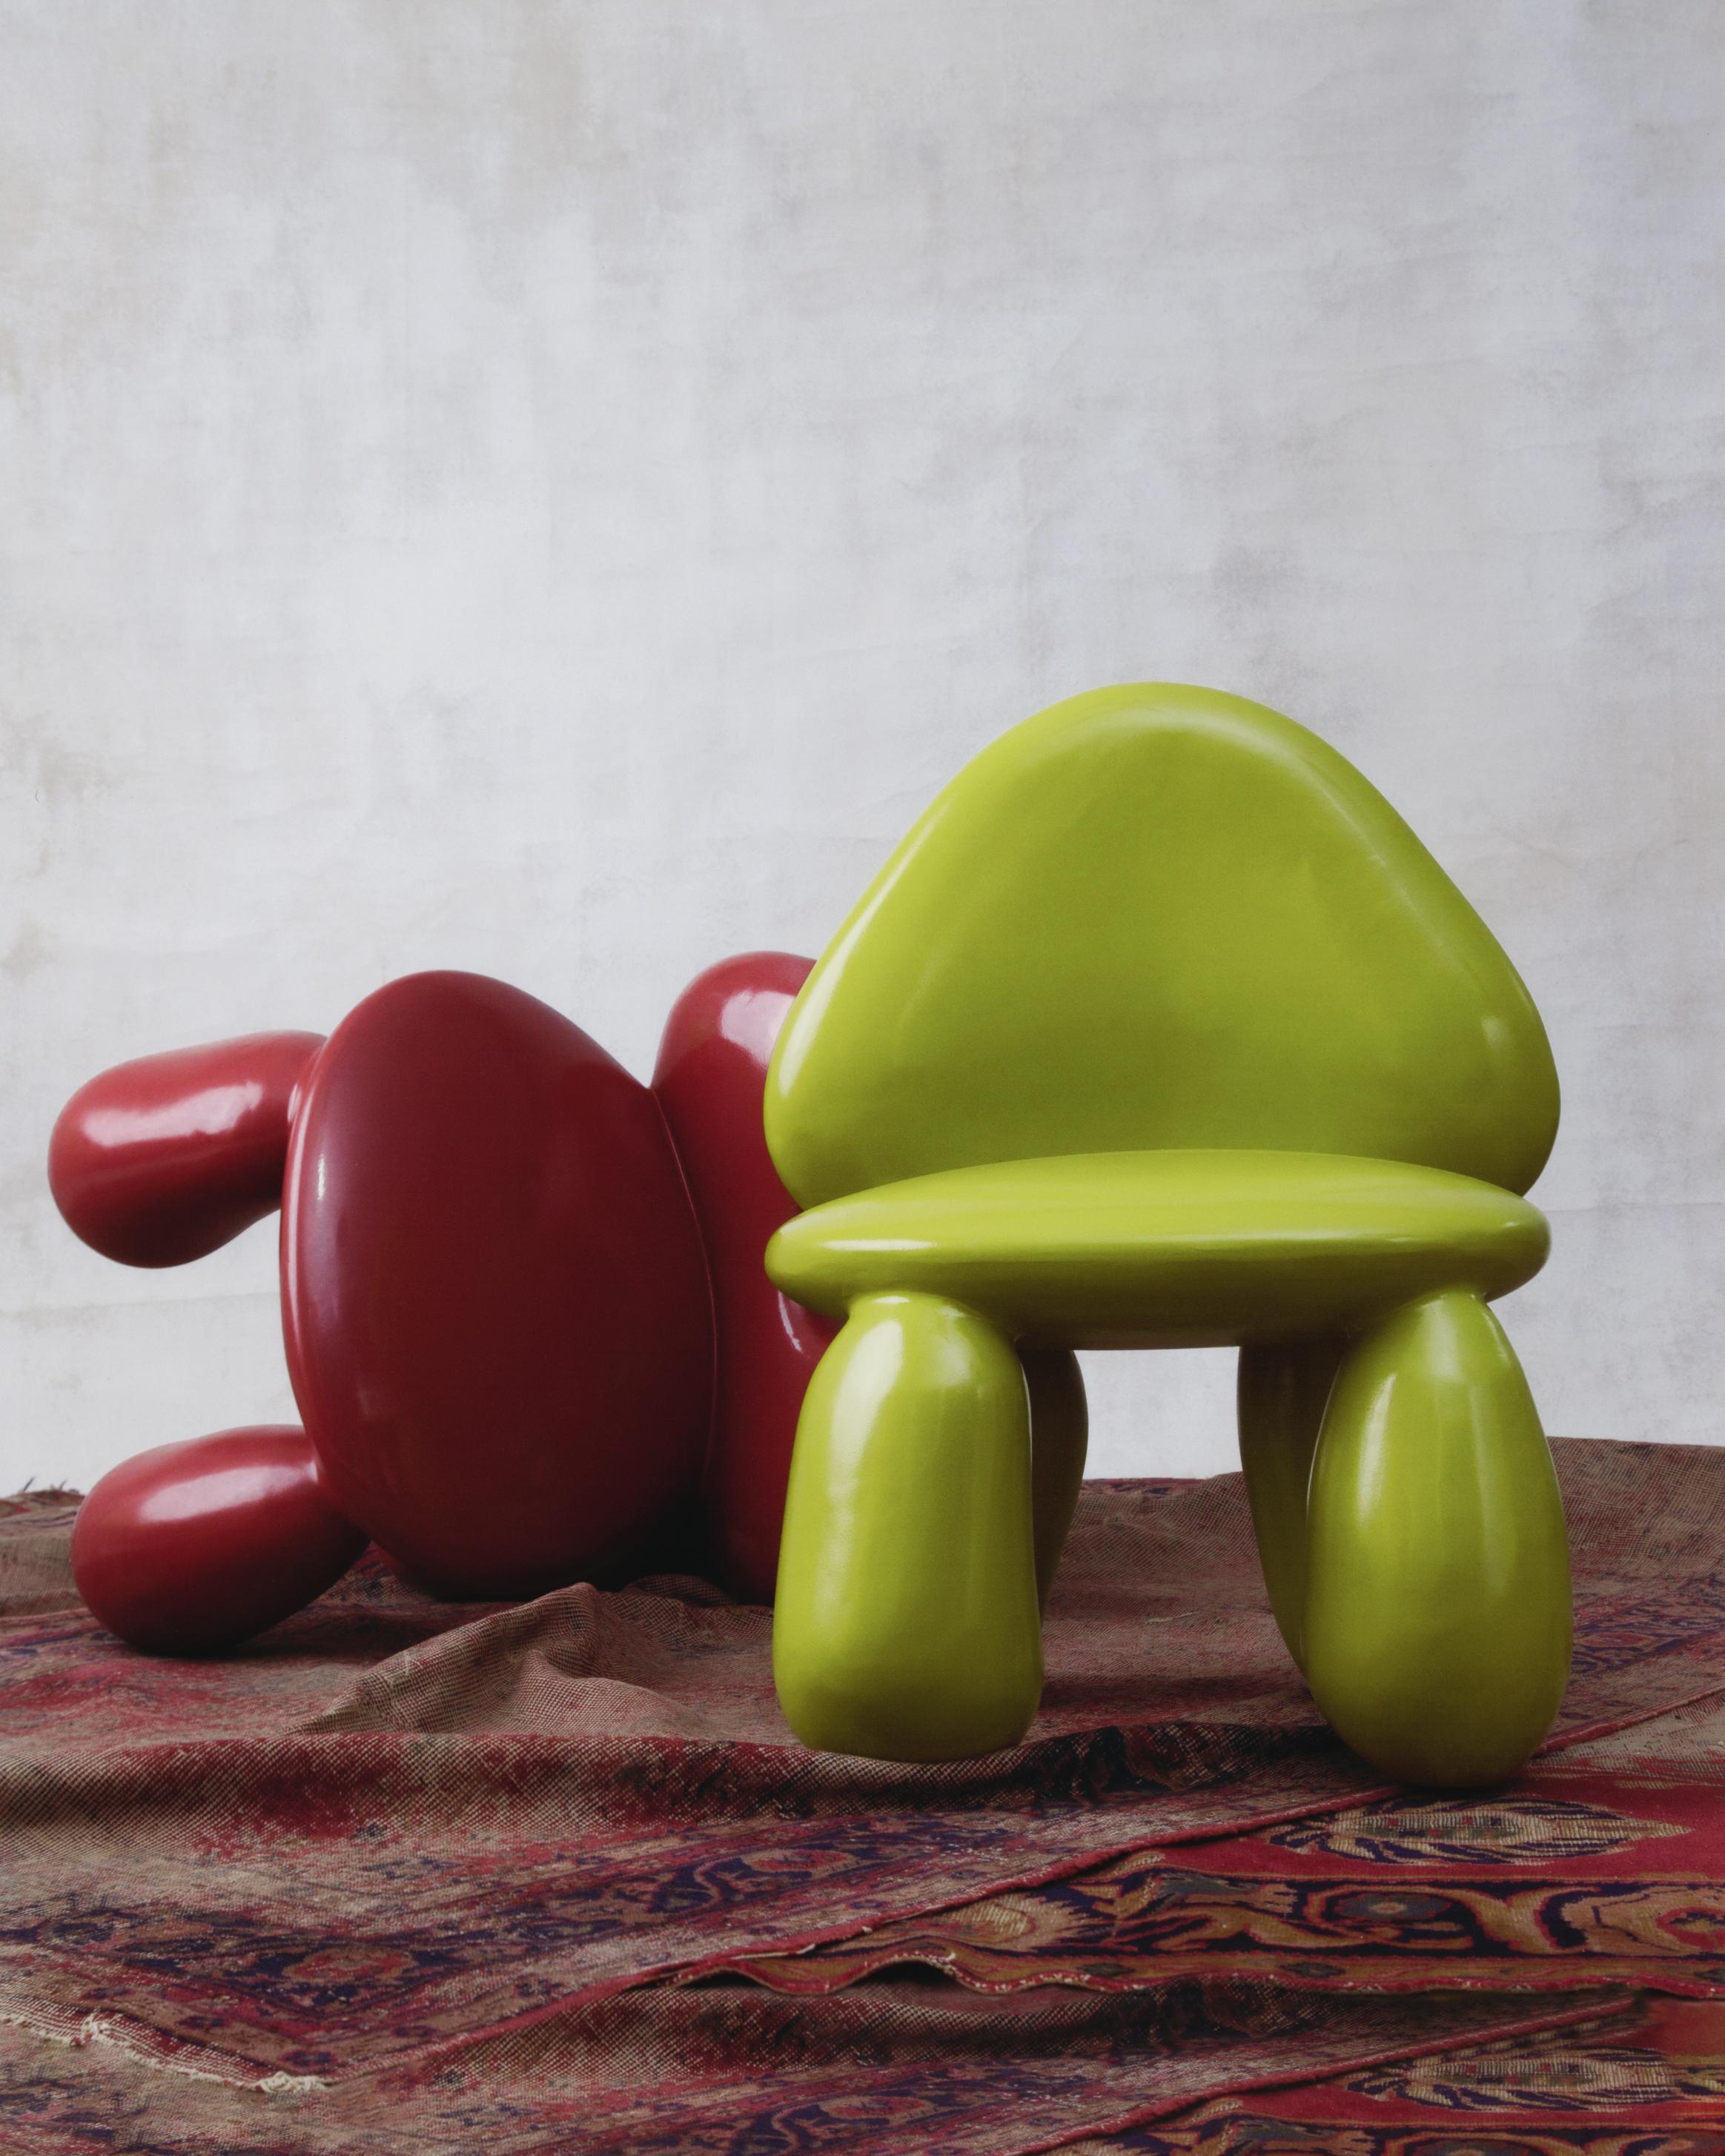 Contemporary Postmodern-Inspired Accent Chair and Sculpture, Behsheen Chair For Sale